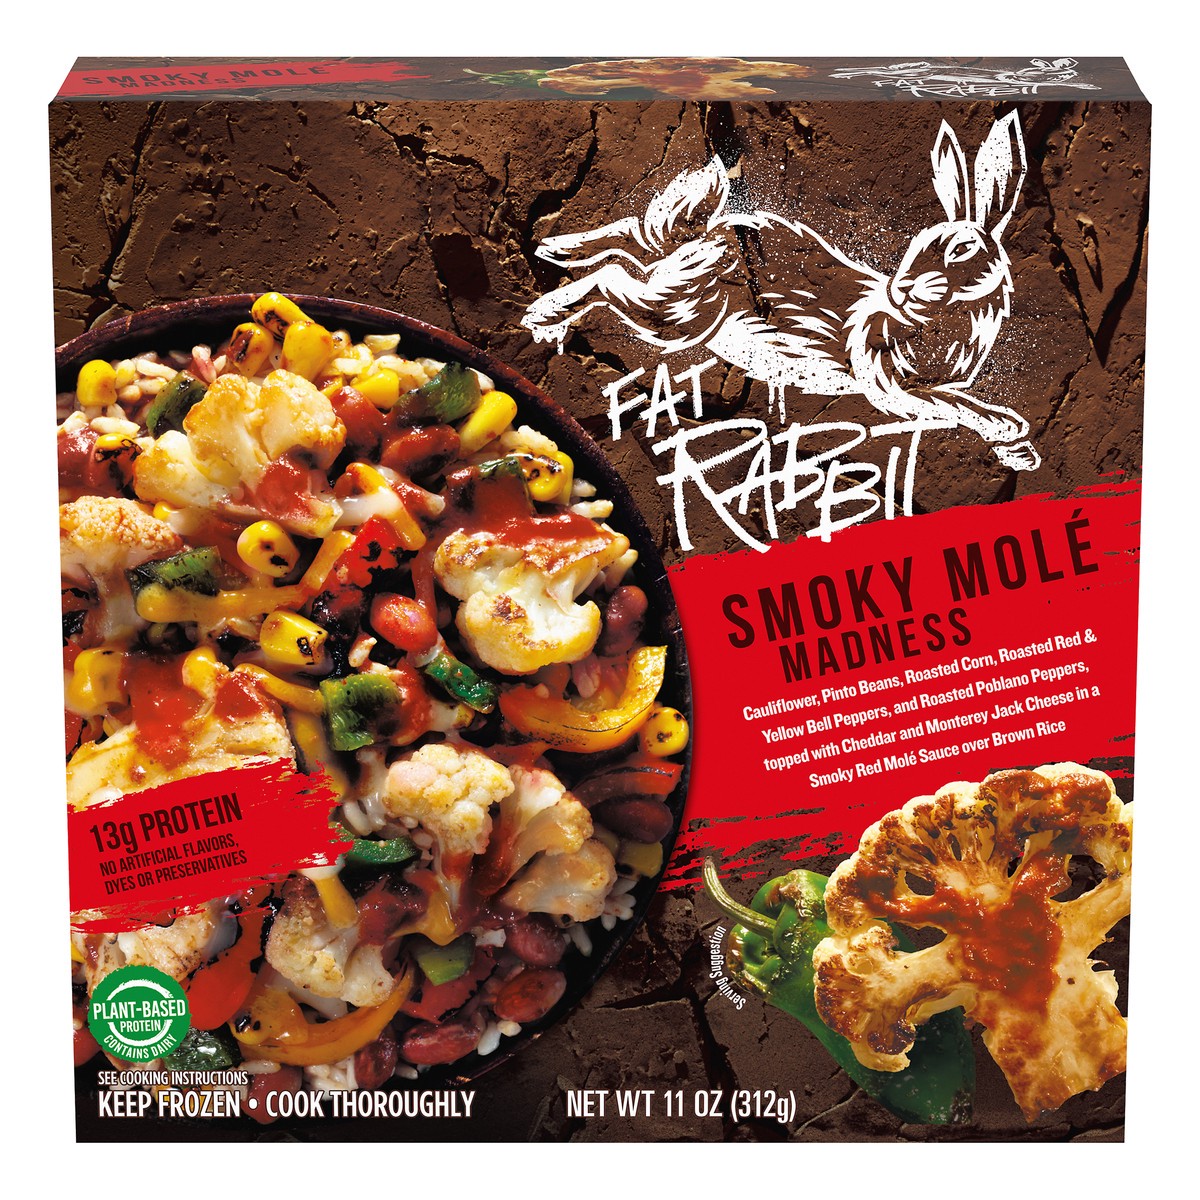 slide 4 of 14, Fat Rabbit Smoky Mole Madness with Roasted Vegetables, Pinto Beans & Cheese in a Red Mole Sauce over Brown Rice Frozen Meal, 11 oz Box, 11 oz